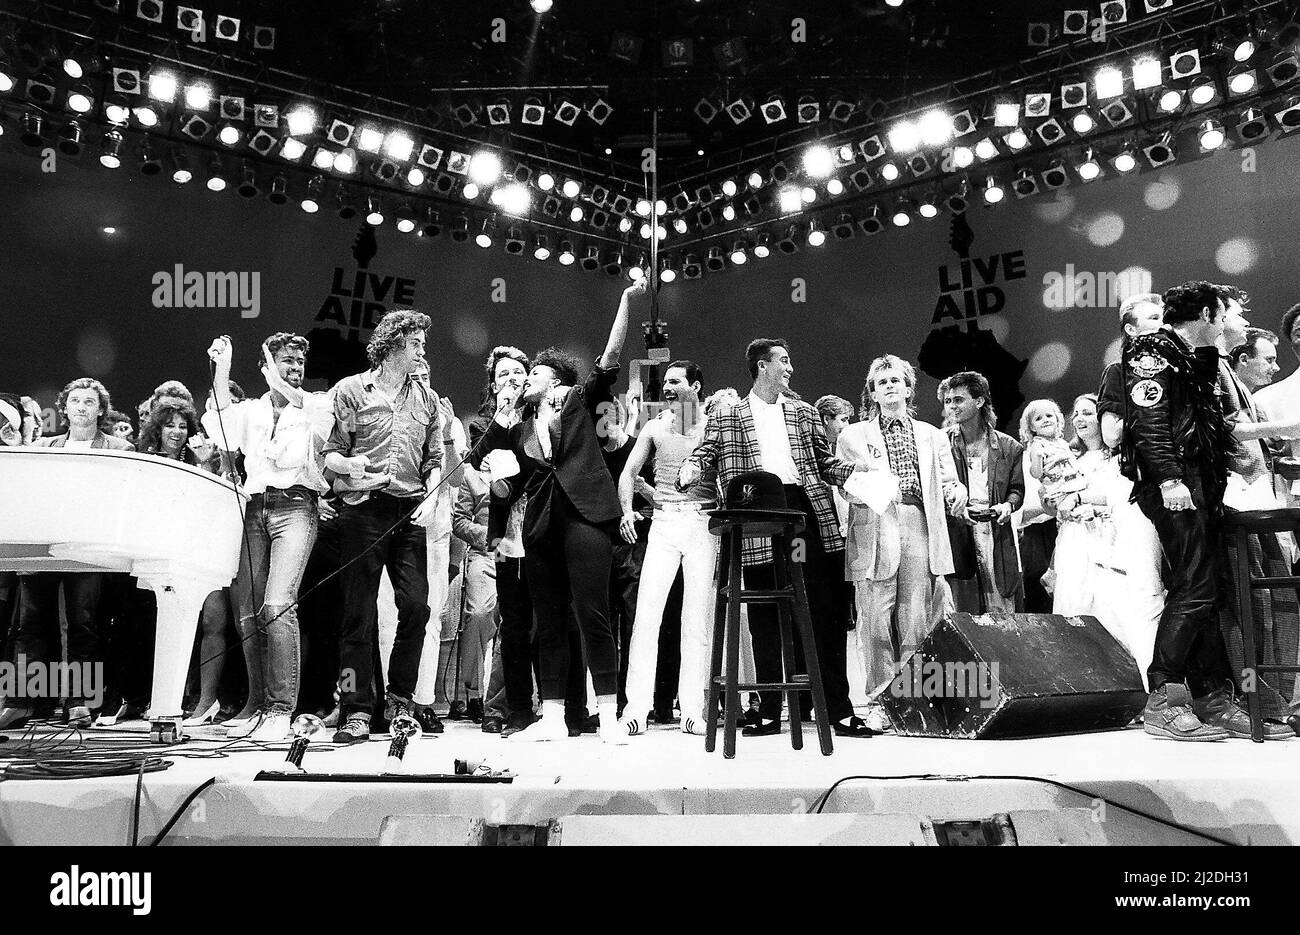 Live Aid Concert in aid of the Feed the World campaign for the starving millions in Africa, Where music stars performed many songs for charity pictured is the finale of the show with George Michael Bob Geldof Bono Freddie Mercury Andrew Ridgley and Howard Jones The concert took place at Wembley Stadium Freddie Mercury  1980s Stock Photo